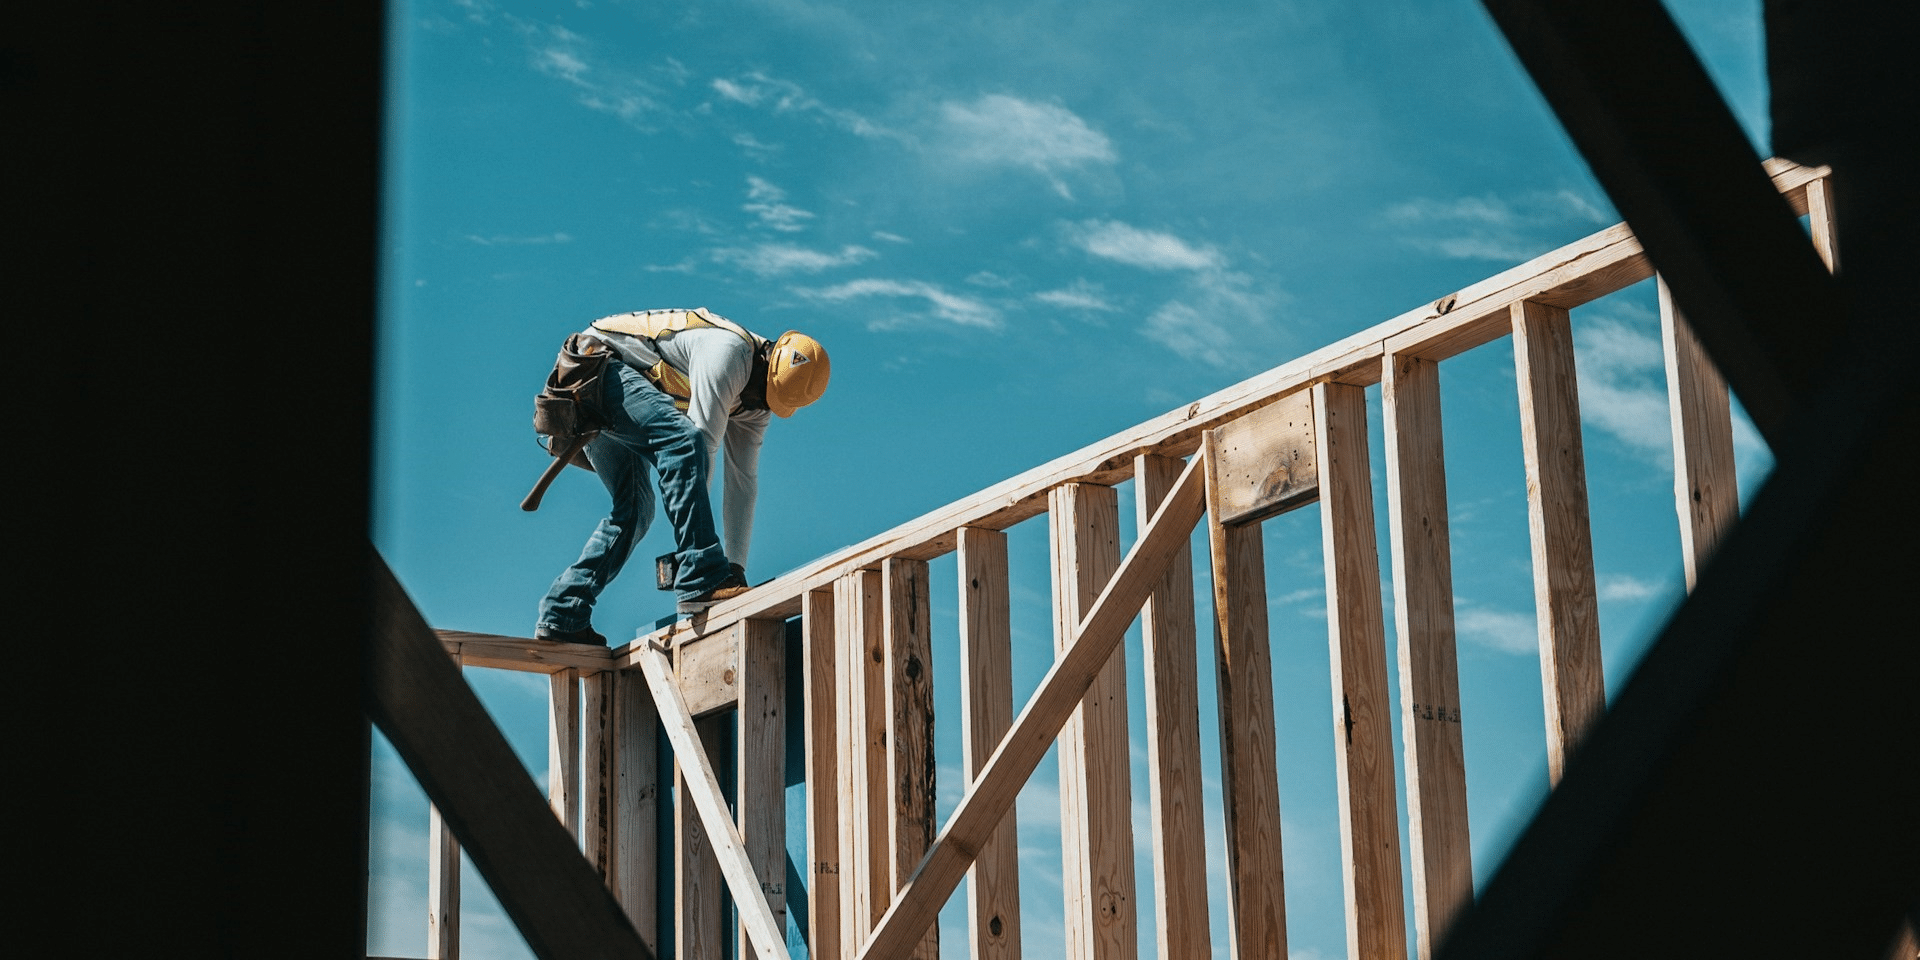 The Prospects of Starting Your Own Construction Company